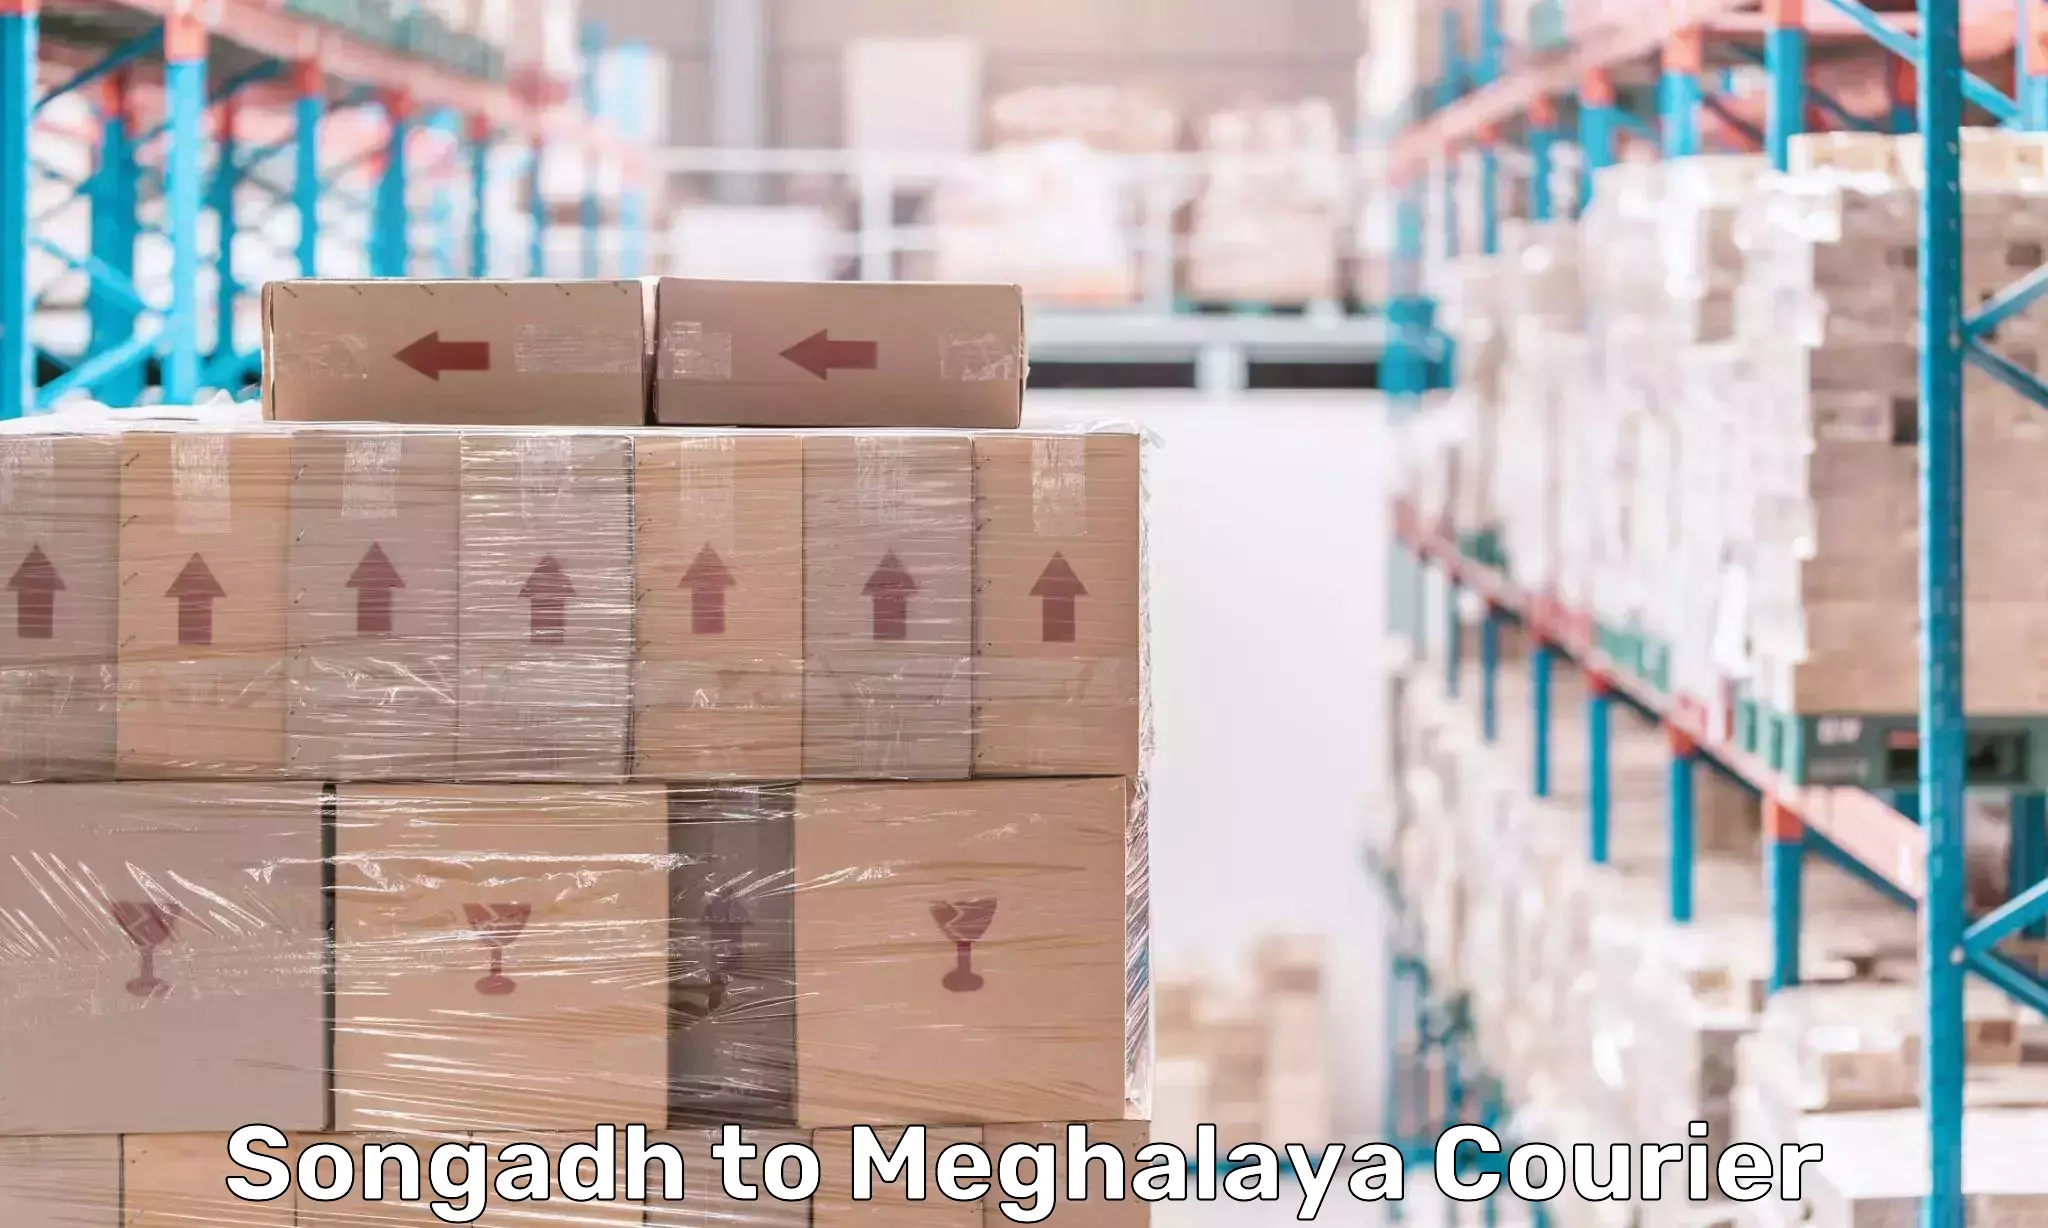 Package delivery network Songadh to Meghalaya